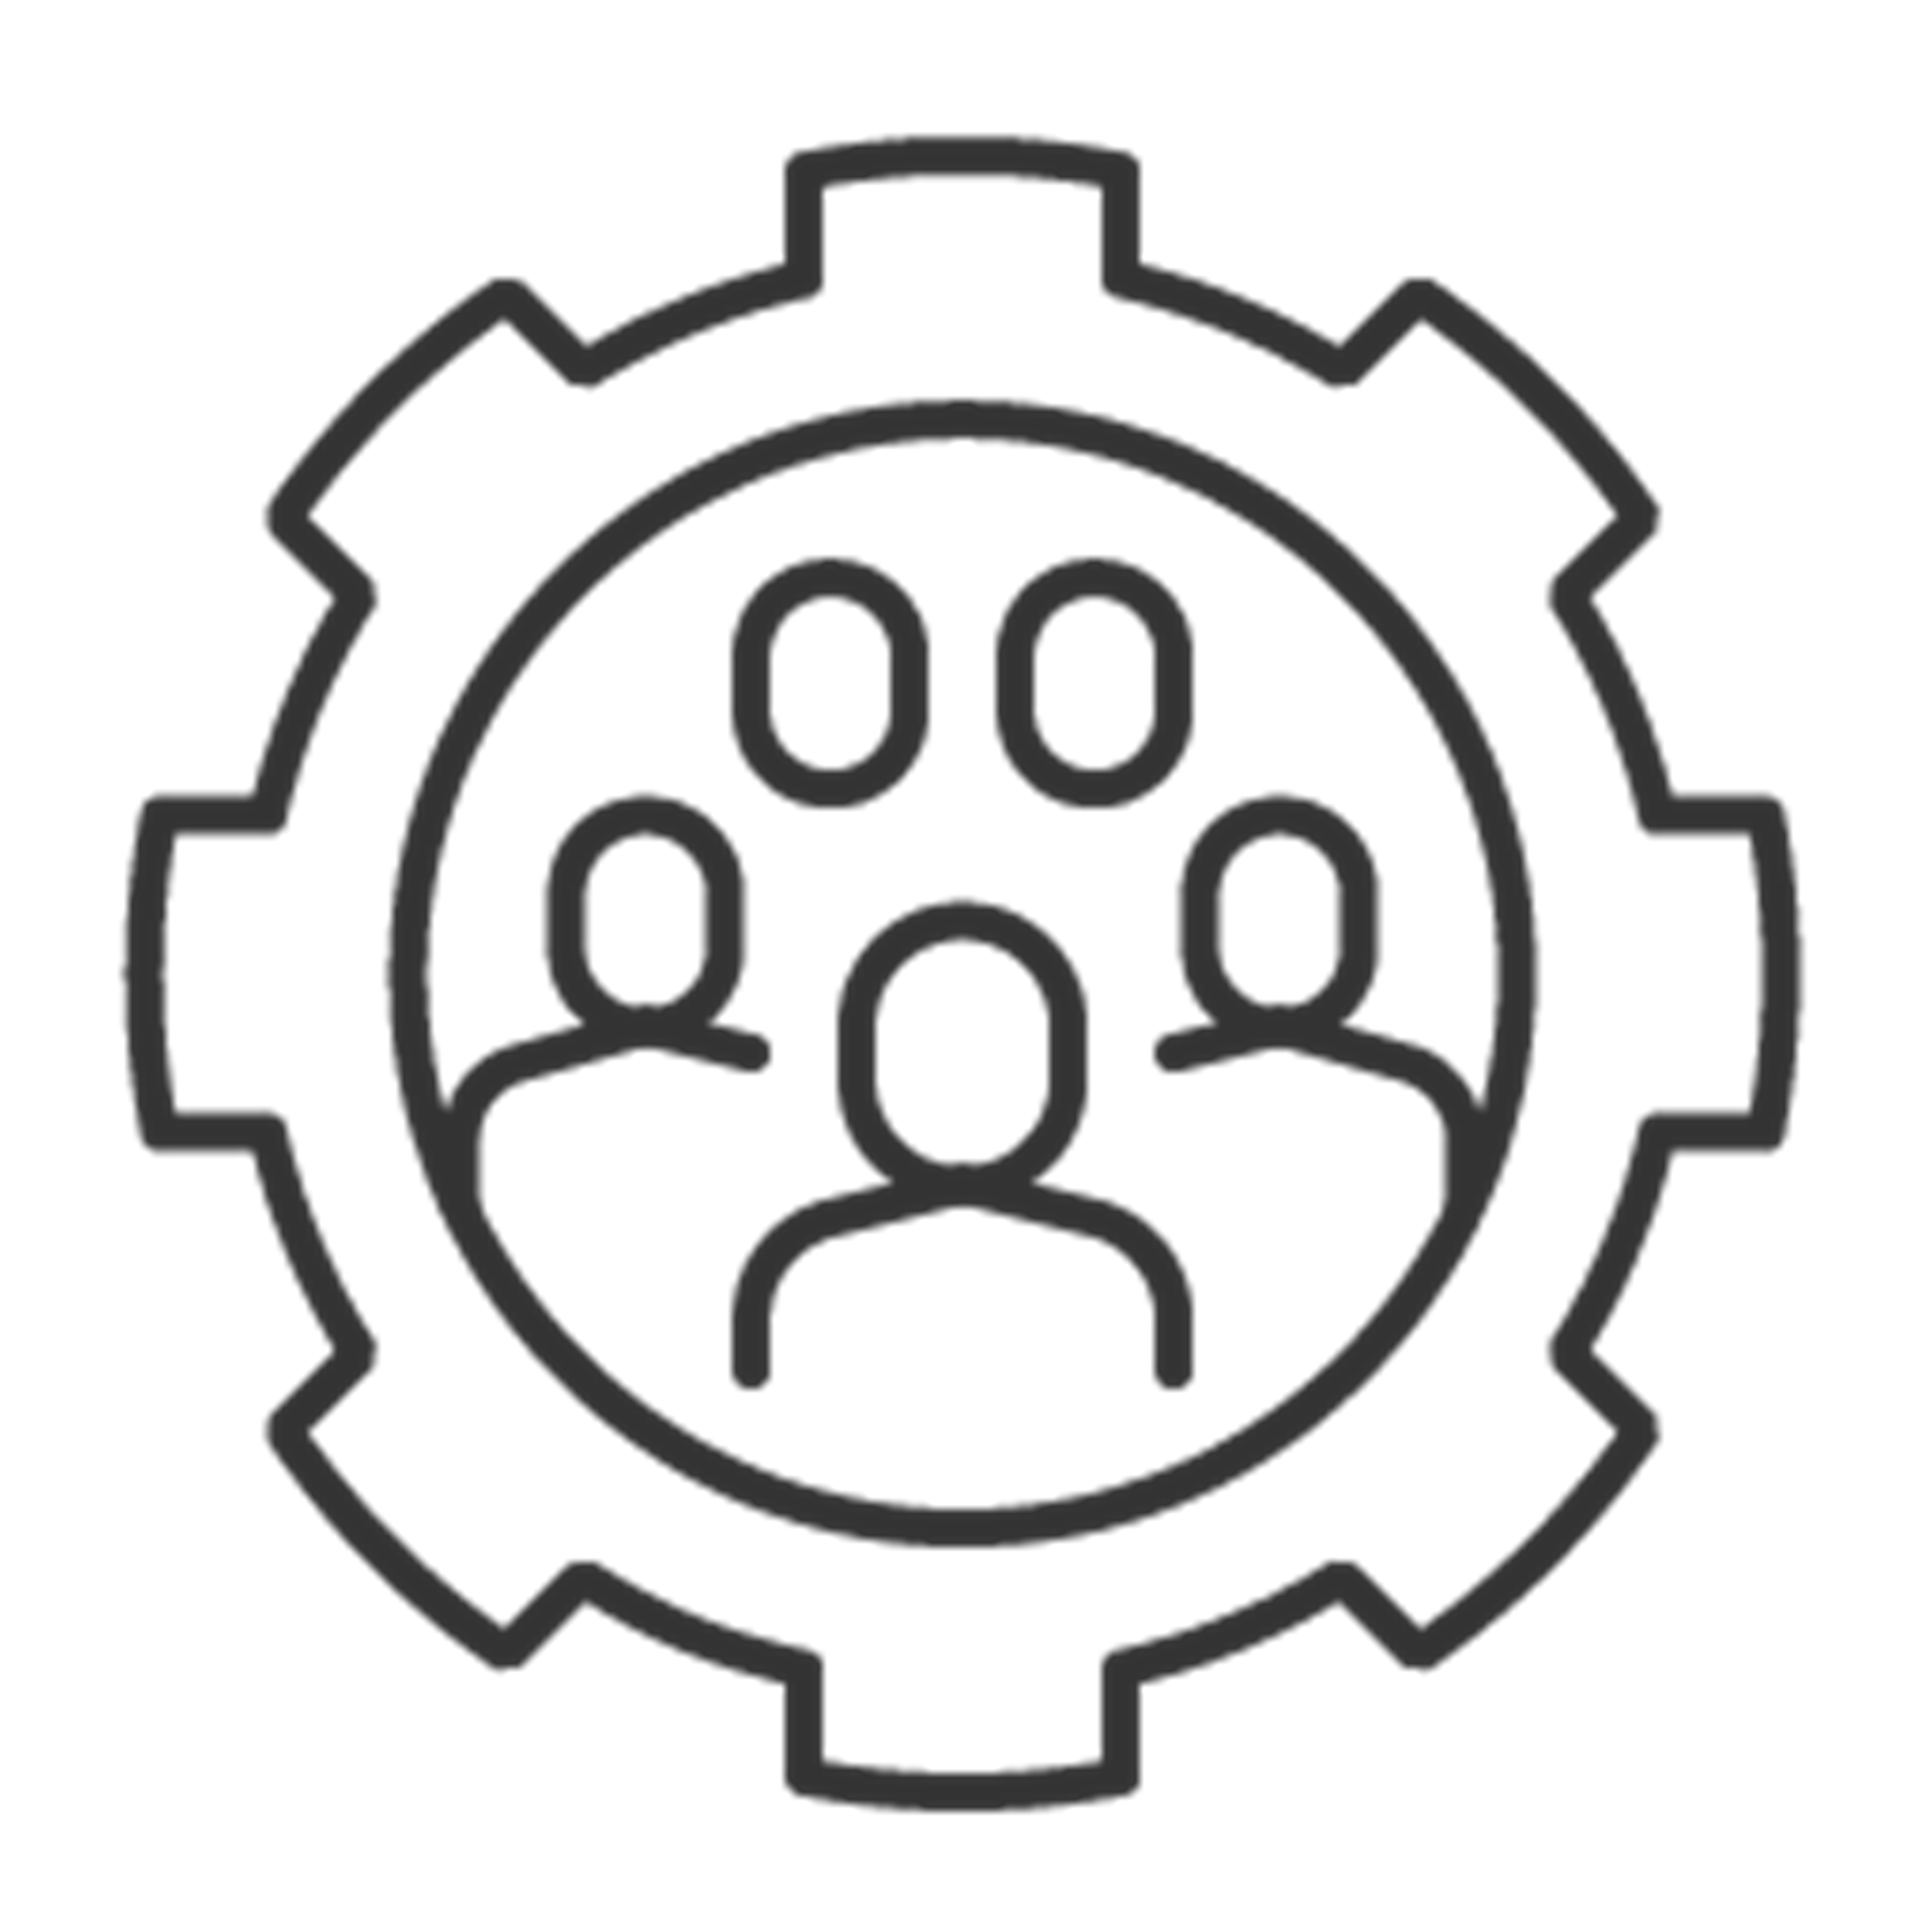 Icon of a gear with people inside the gear